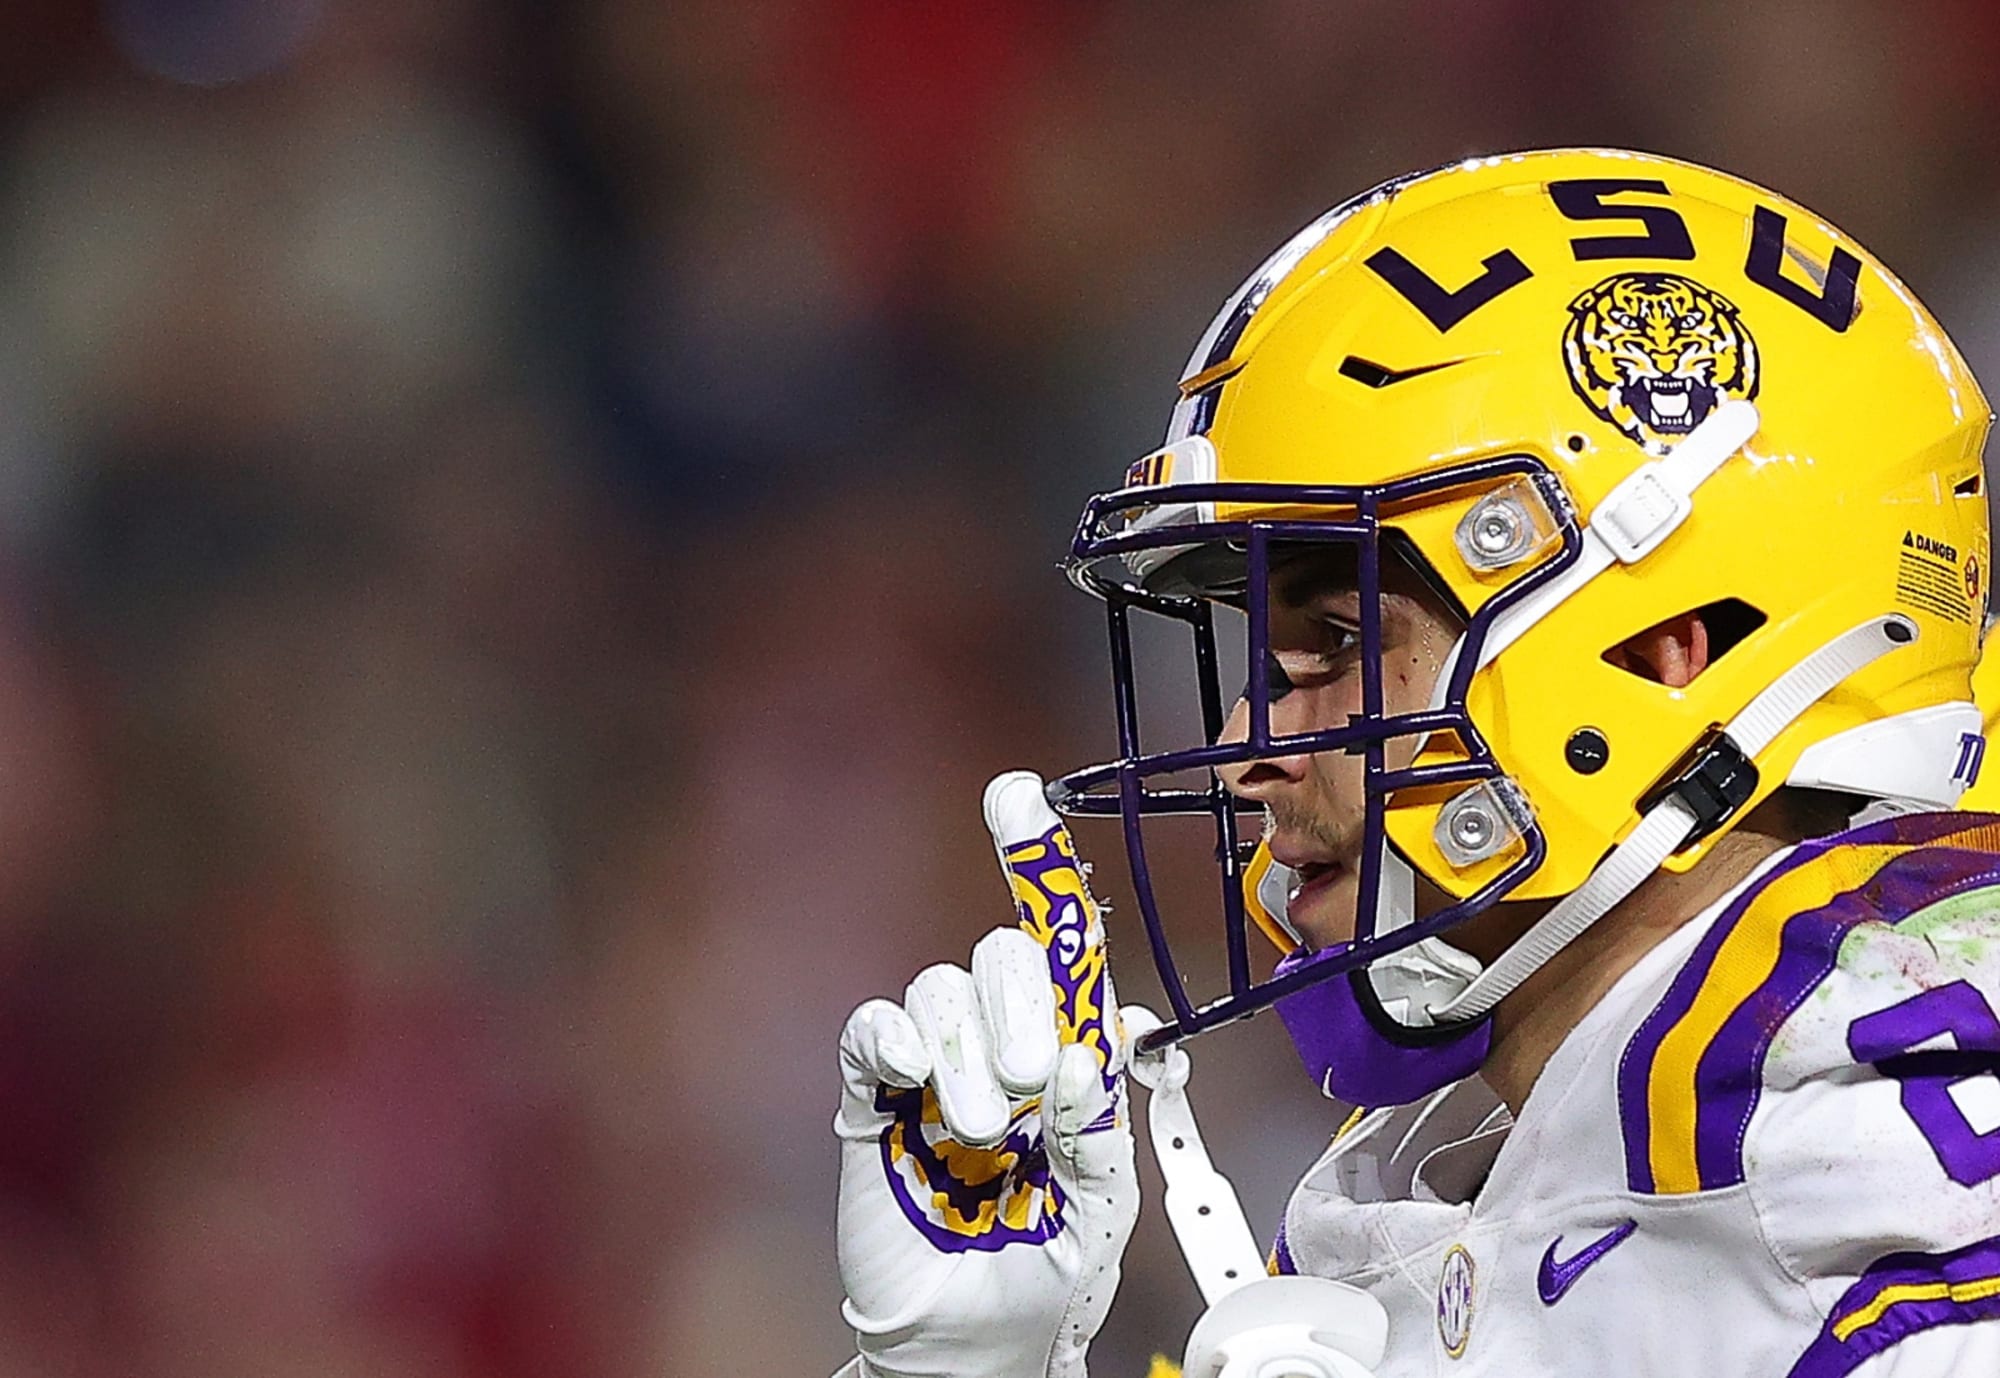 LSU football vs. Tennessee: Betting lines seeing some movement